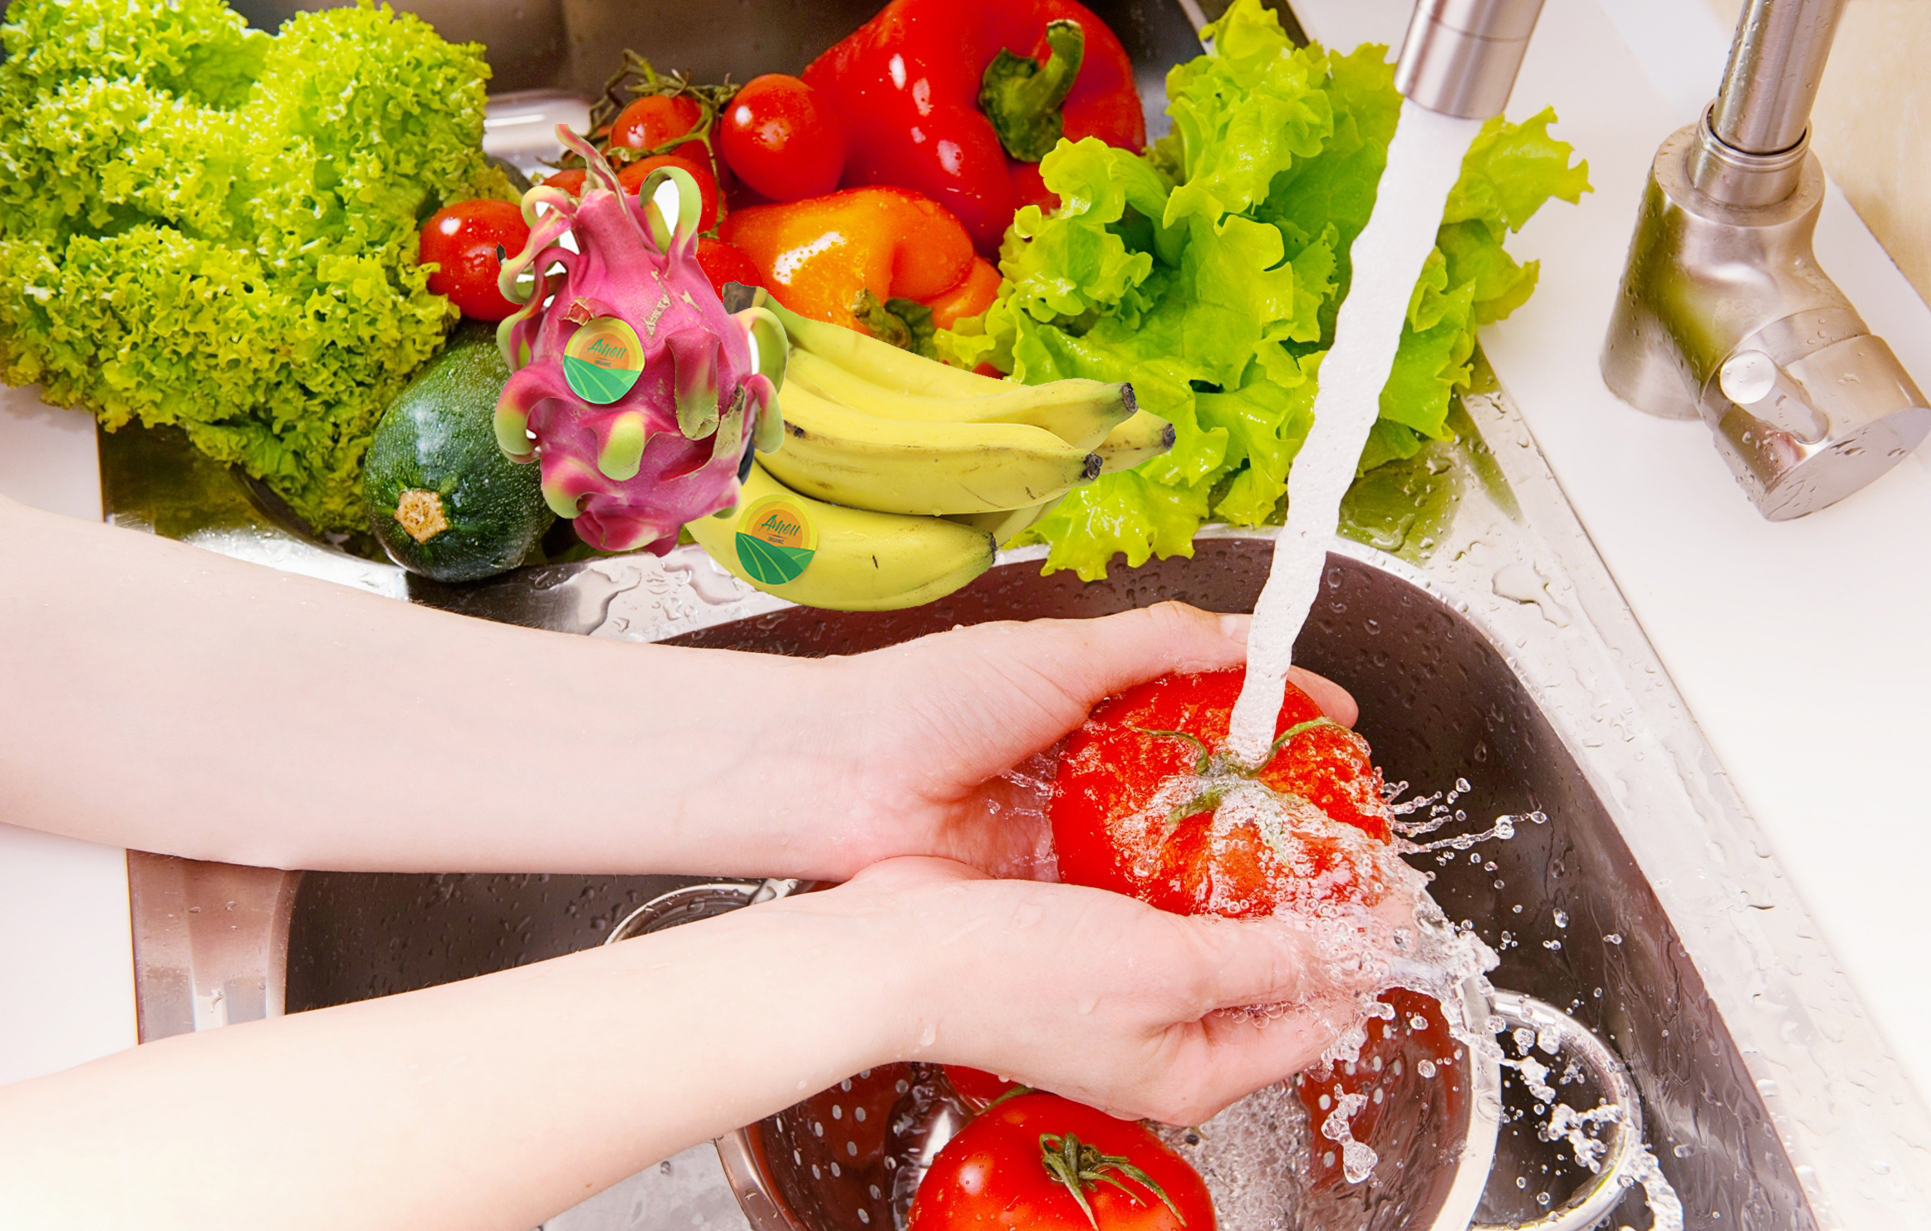 What is clean food? Here are some safe ways to clean vegetables, tubers, fruits, should housewives know.